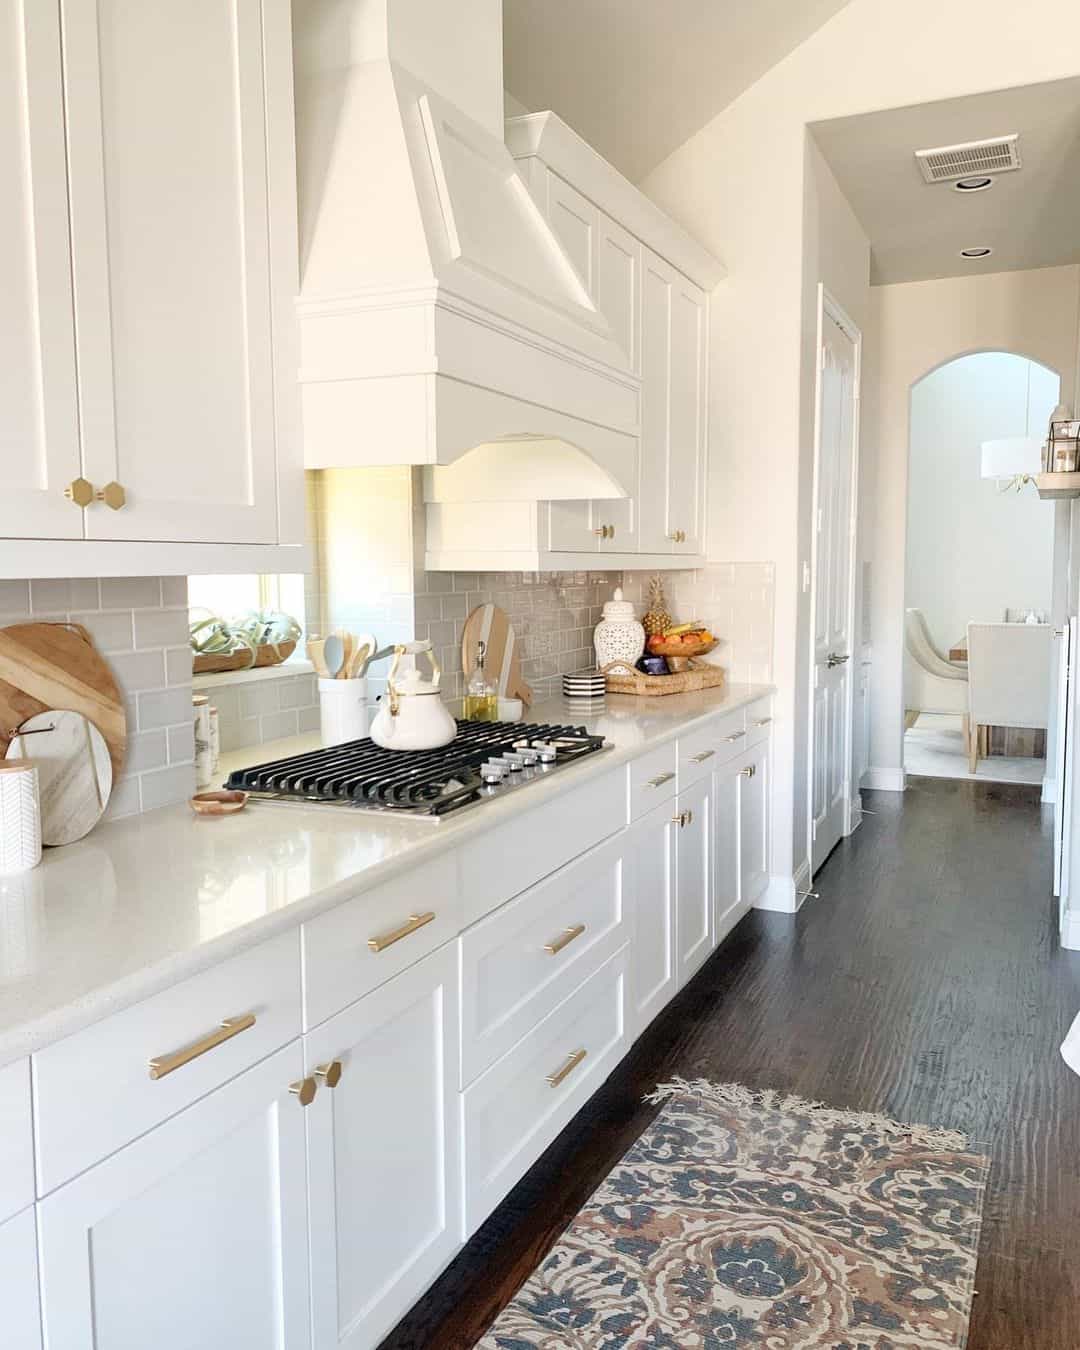 White Shaker Cabinets With Gold Hardware - Soul & Lane